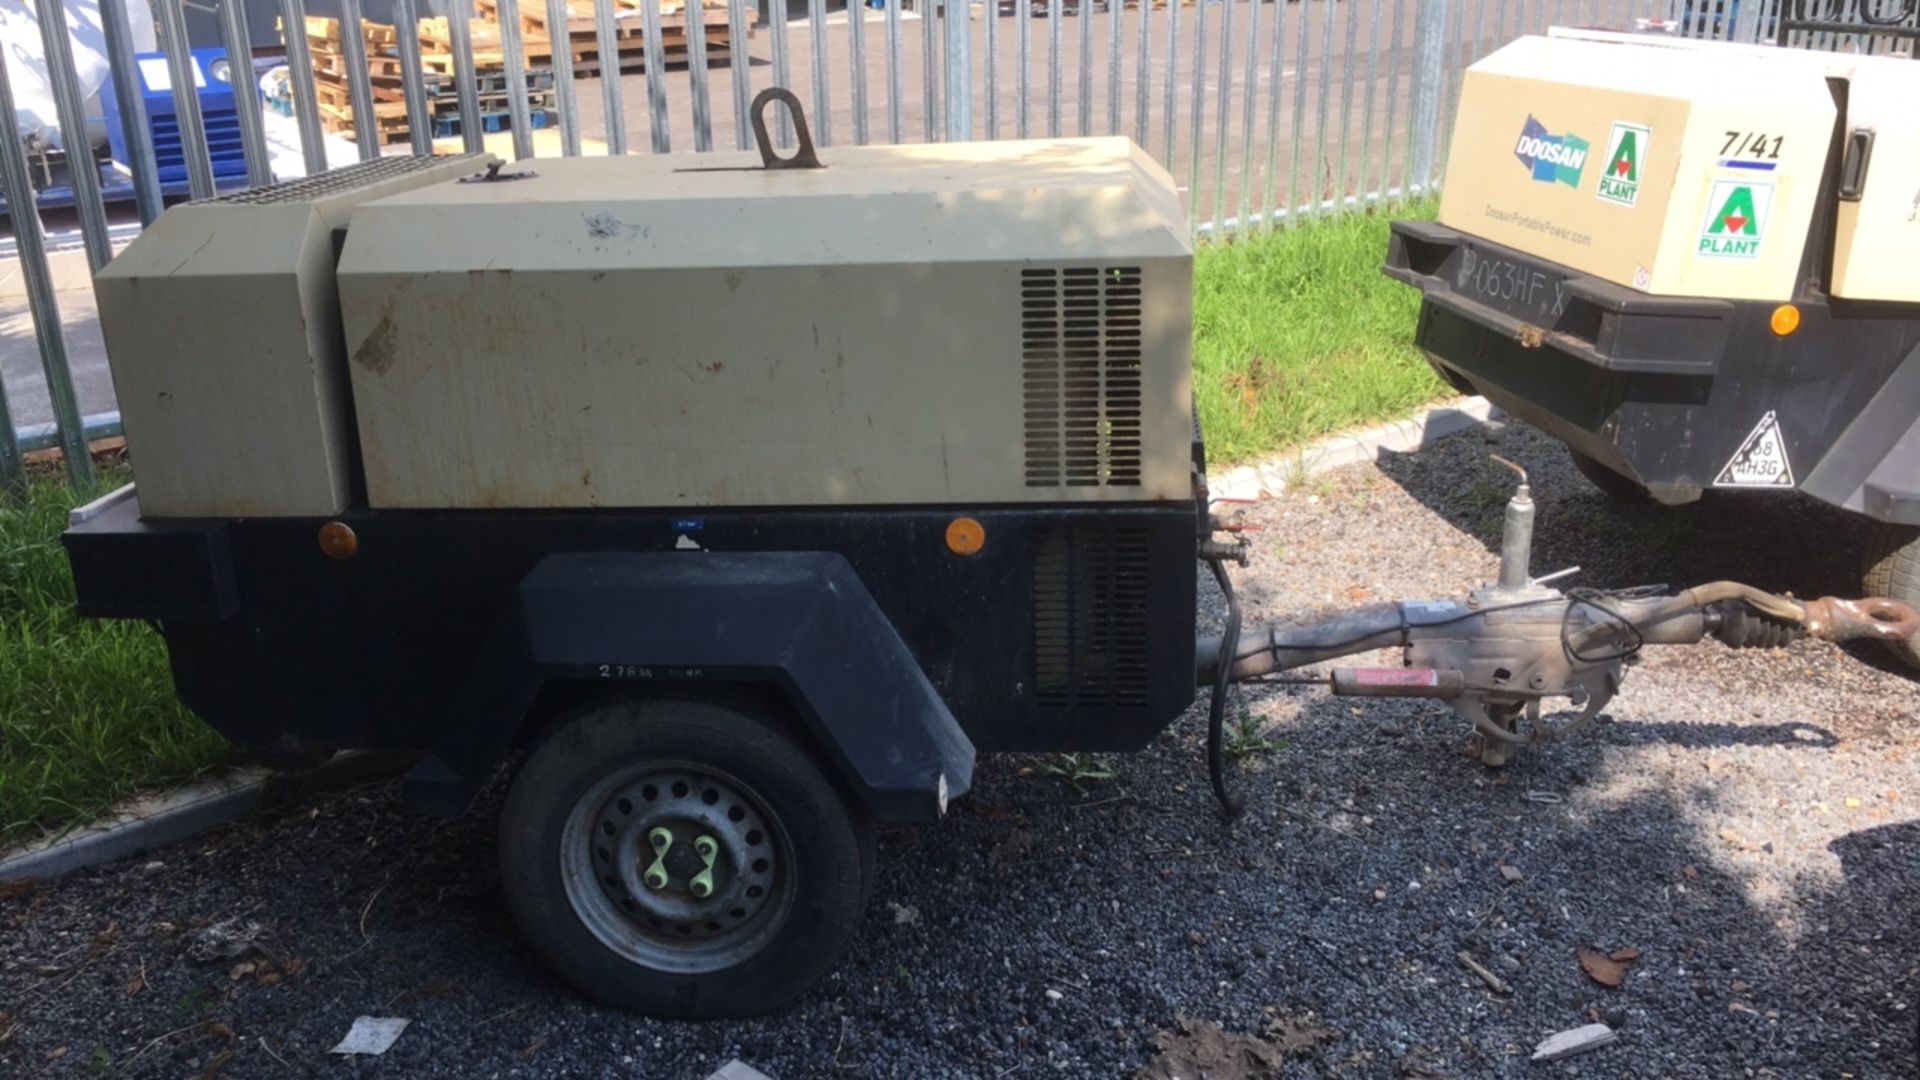 Ingersoll Rand 741 compressor (a563107) - Image 2 of 8